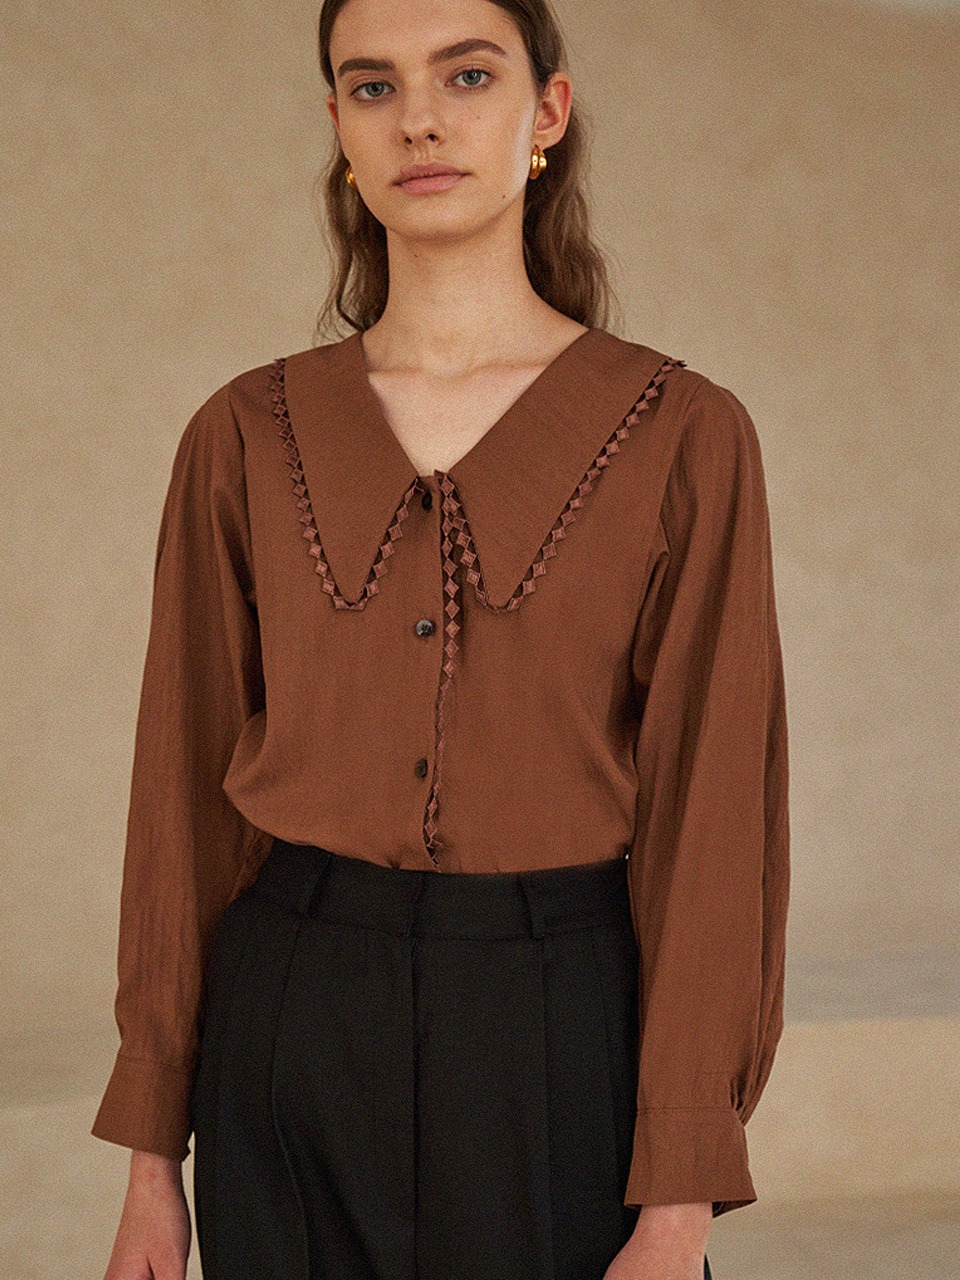 Lace collar blouse in brown